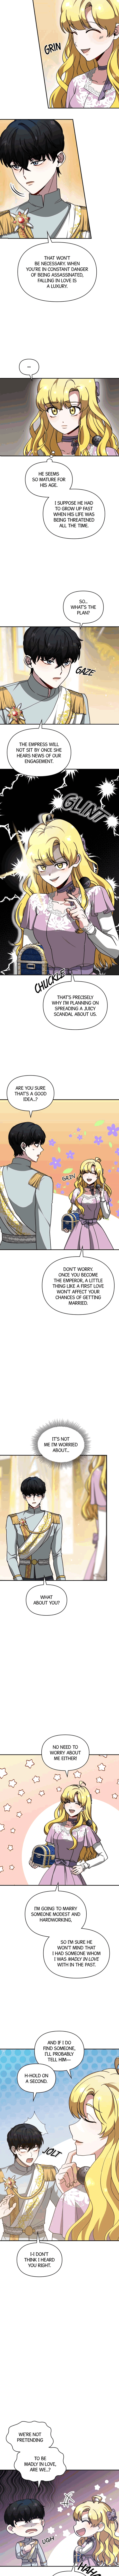 The Forgotten Princess Wants To Live In Peace Chapter 51 page 3